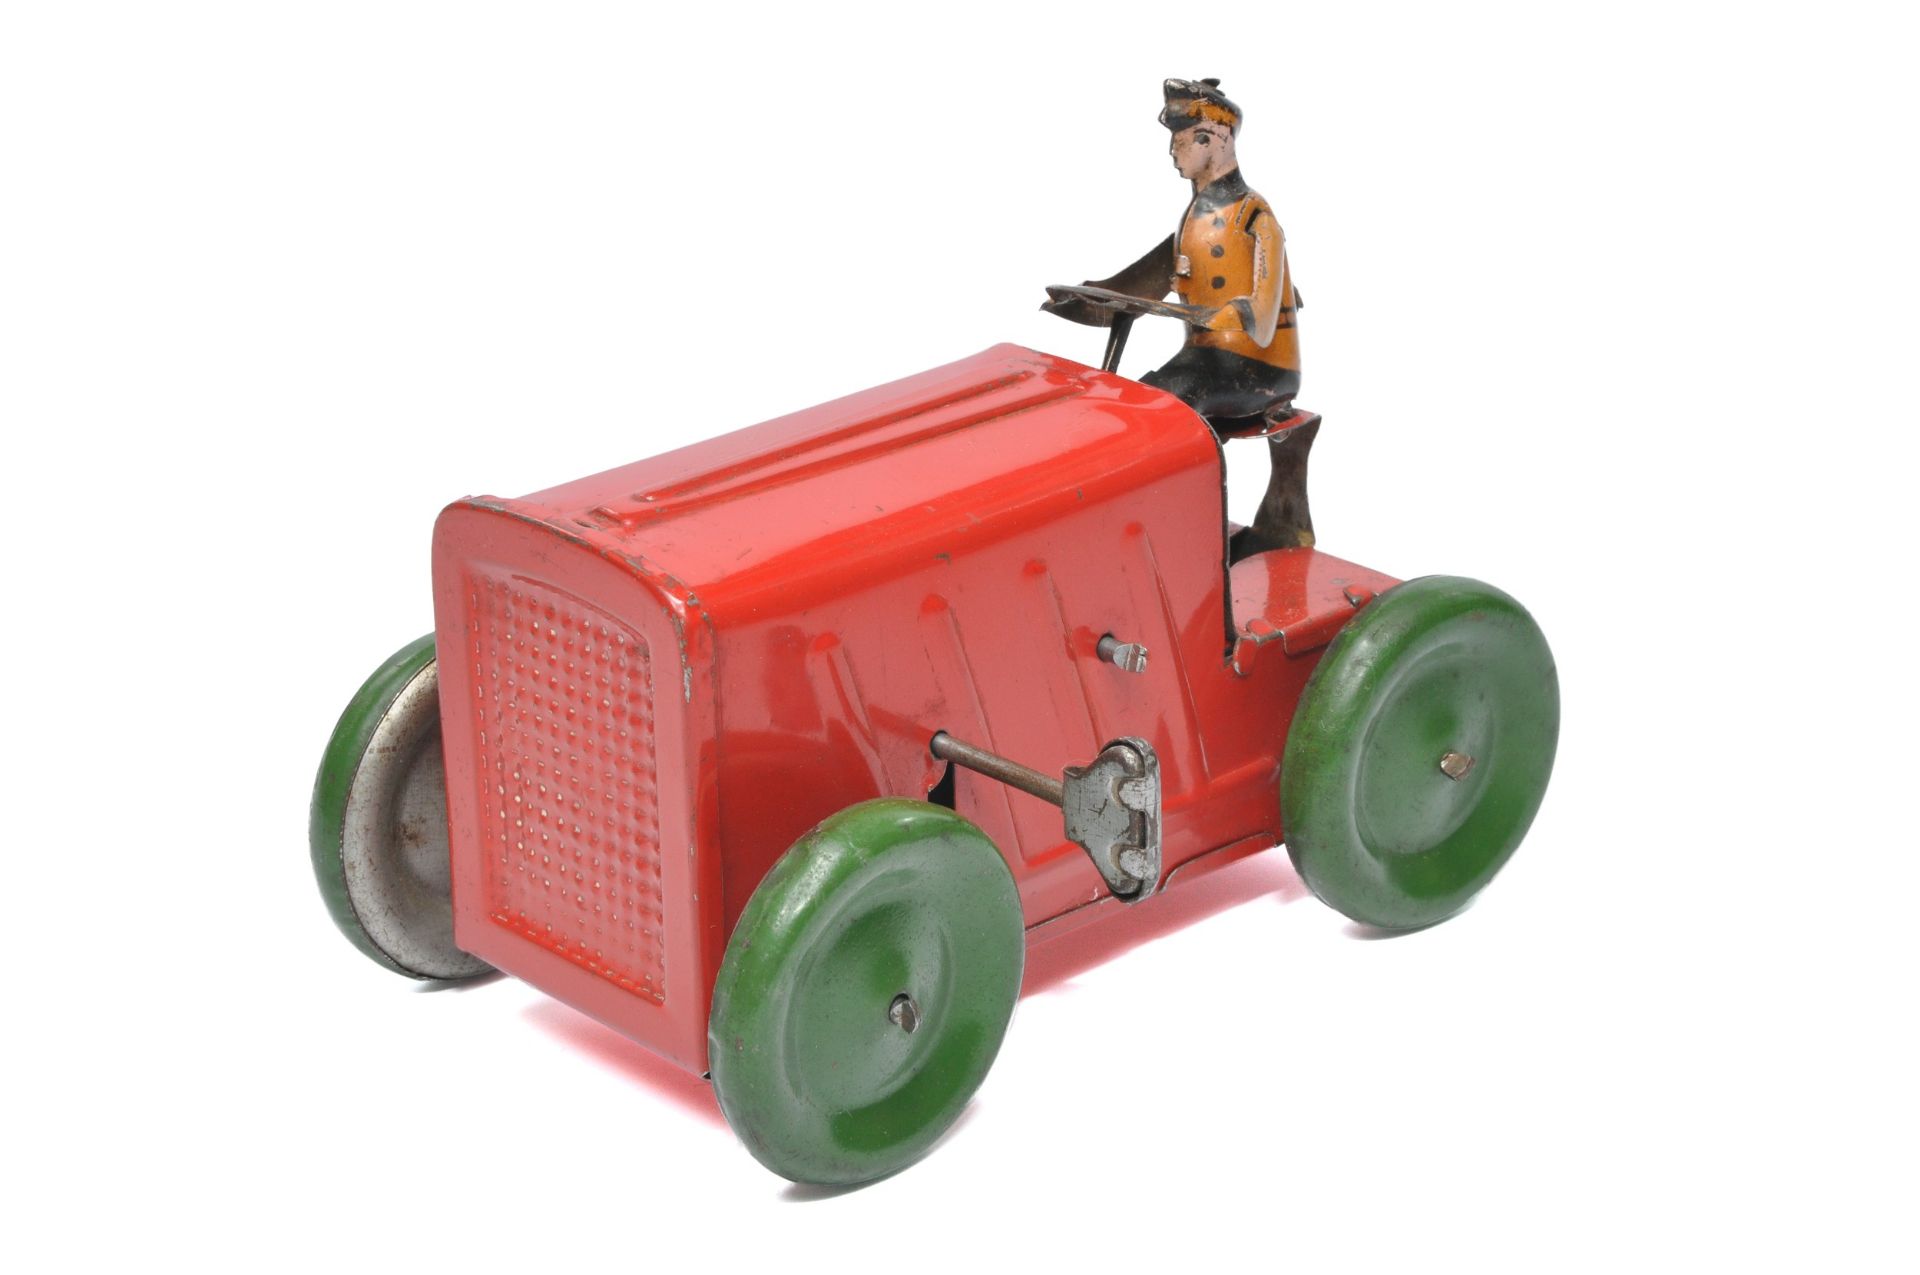 Greppert & Kelch German mechanical tinplate tractor and driver, 5" length. In good working order.